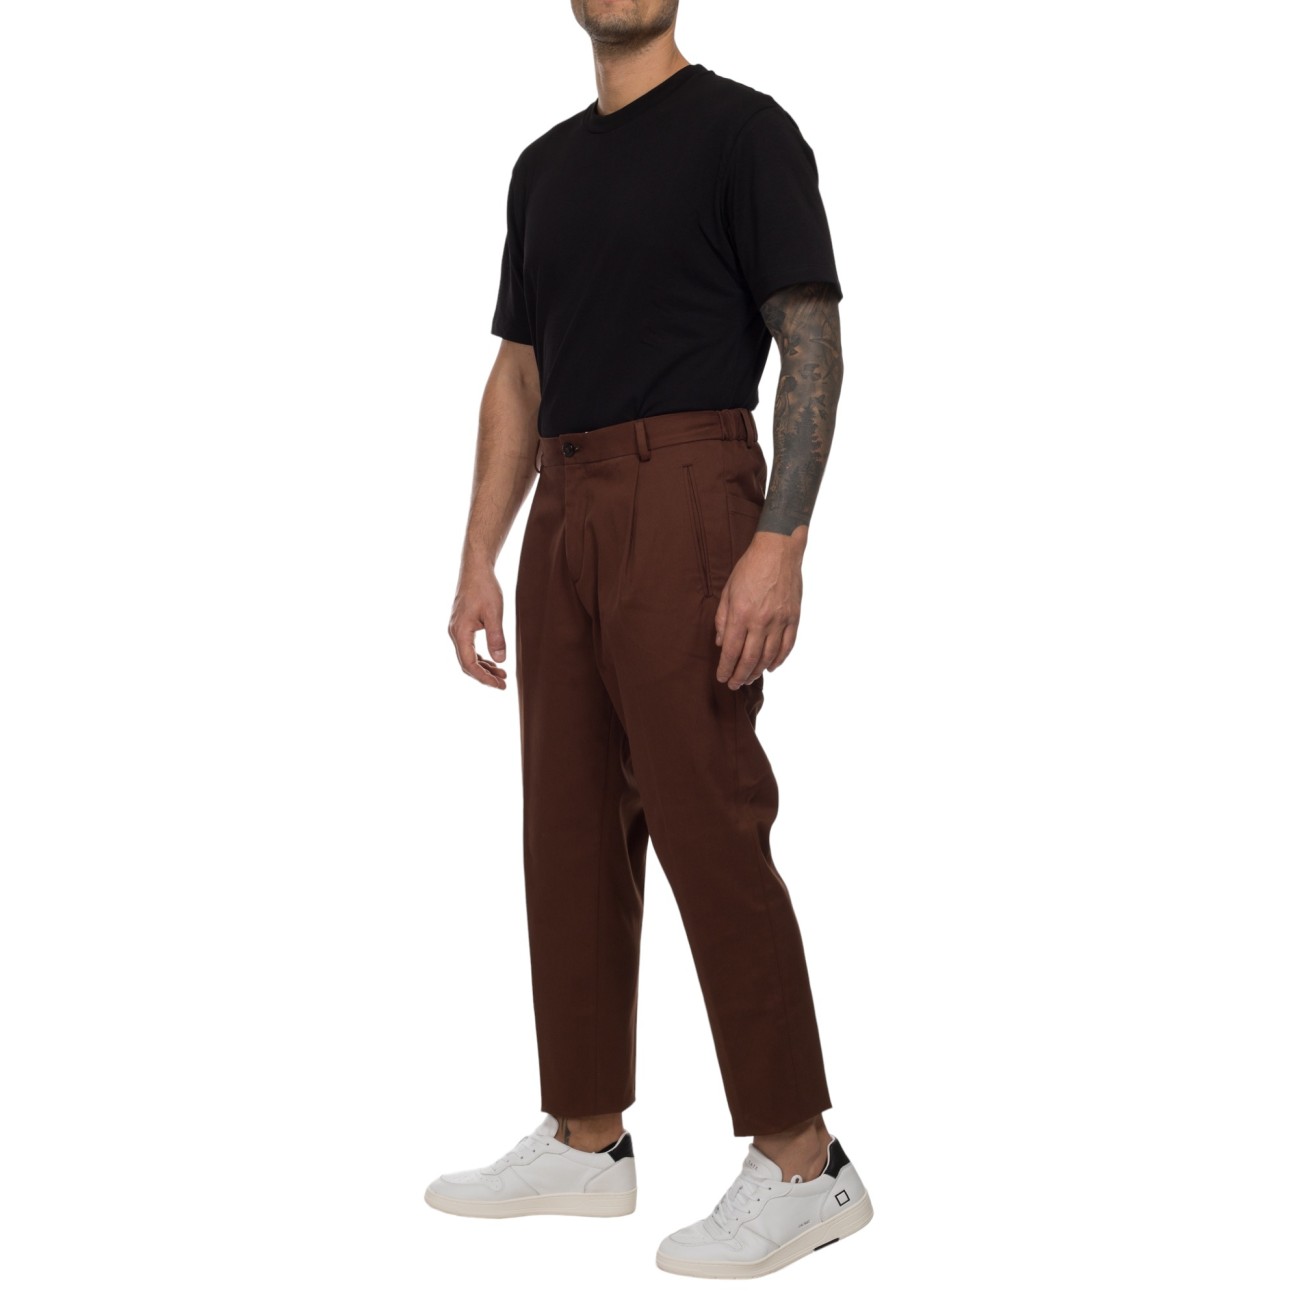 Brown palazzo trousers outfit